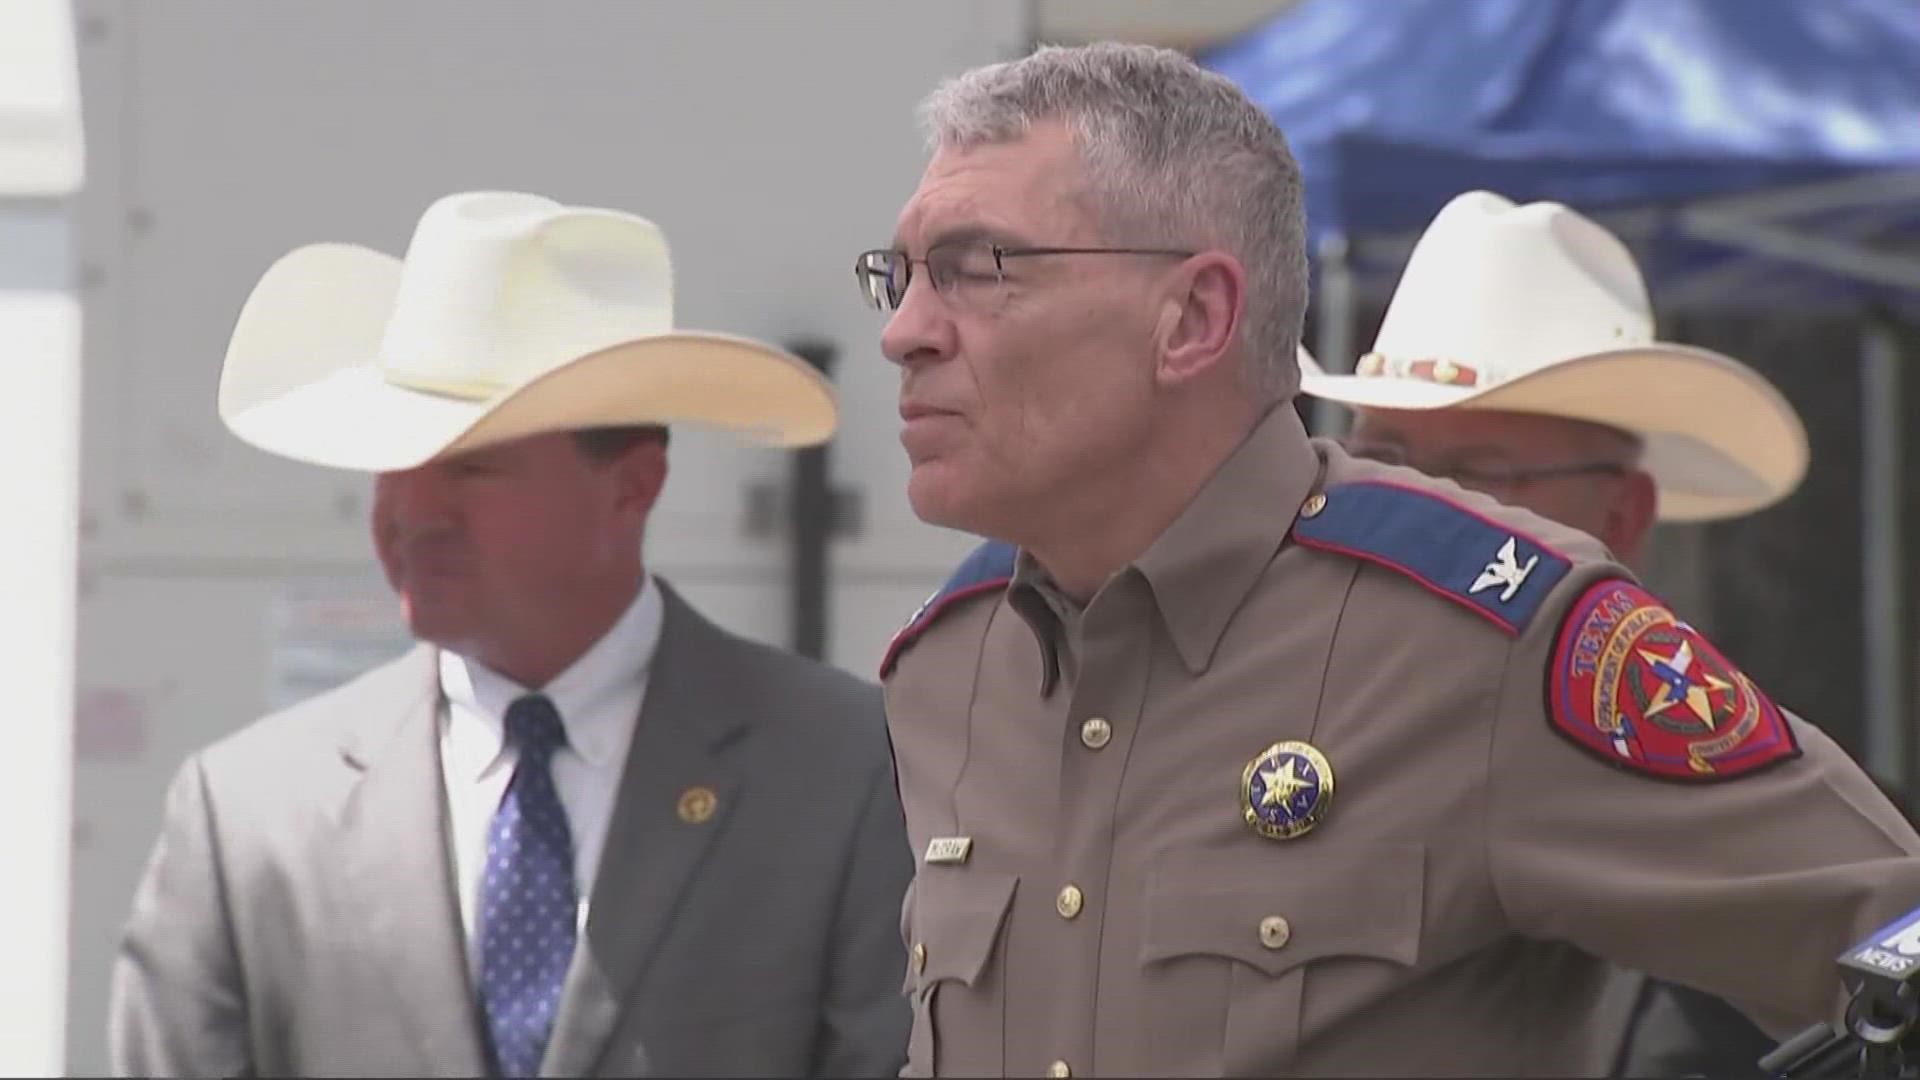 Texas officials are updating the public on the school shooting.